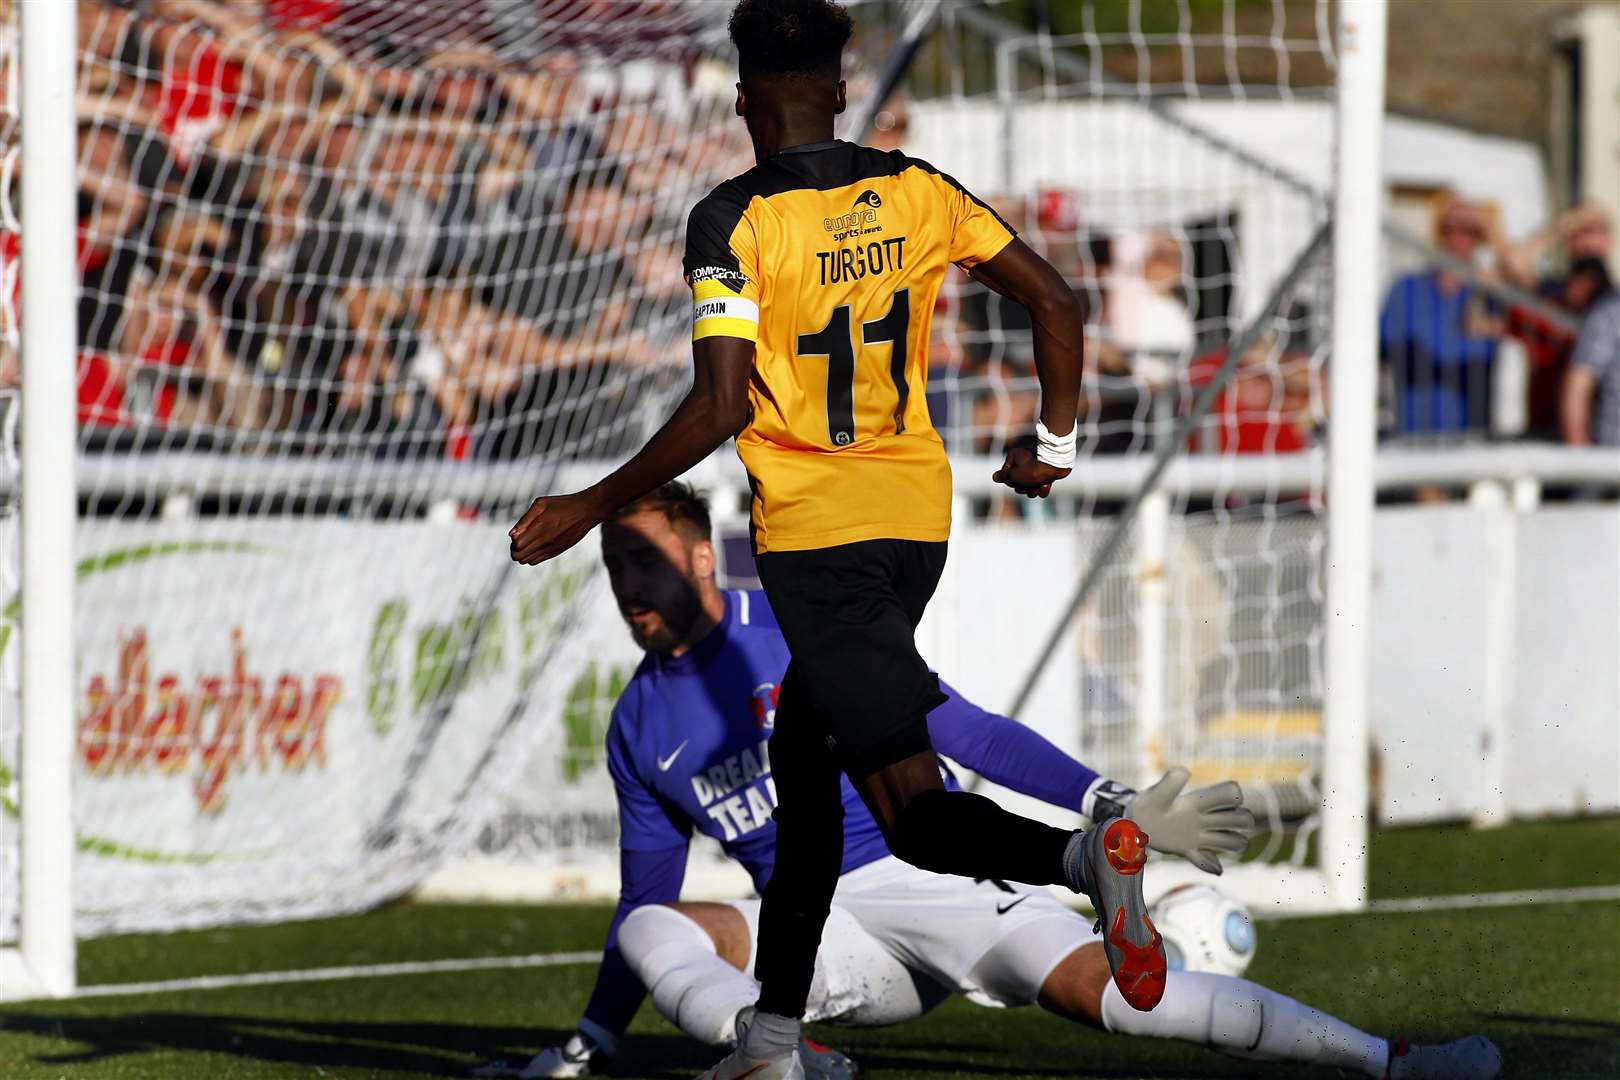 Blair Turgott gives Maidstone the lead after an amazing run from the edge of his own area Picture: Sean Aidan